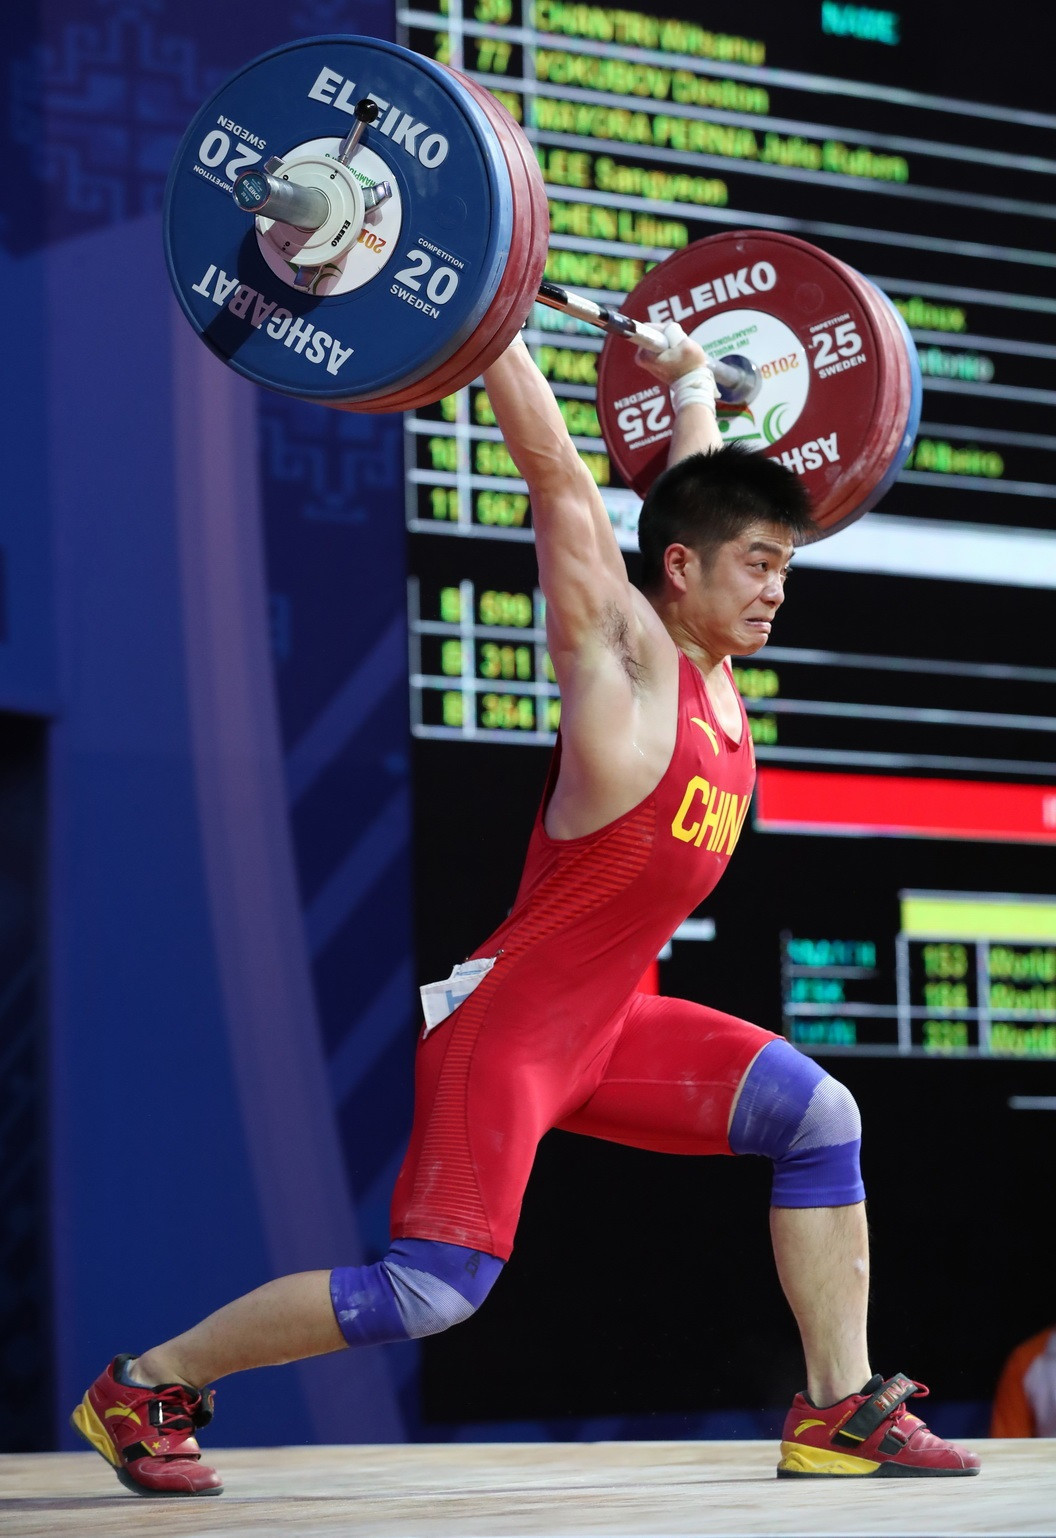 Compatriot Huang Minhao won the snatch but had to settle for the silver medal overall after ending up ninth in the clean and jerk ©IWF